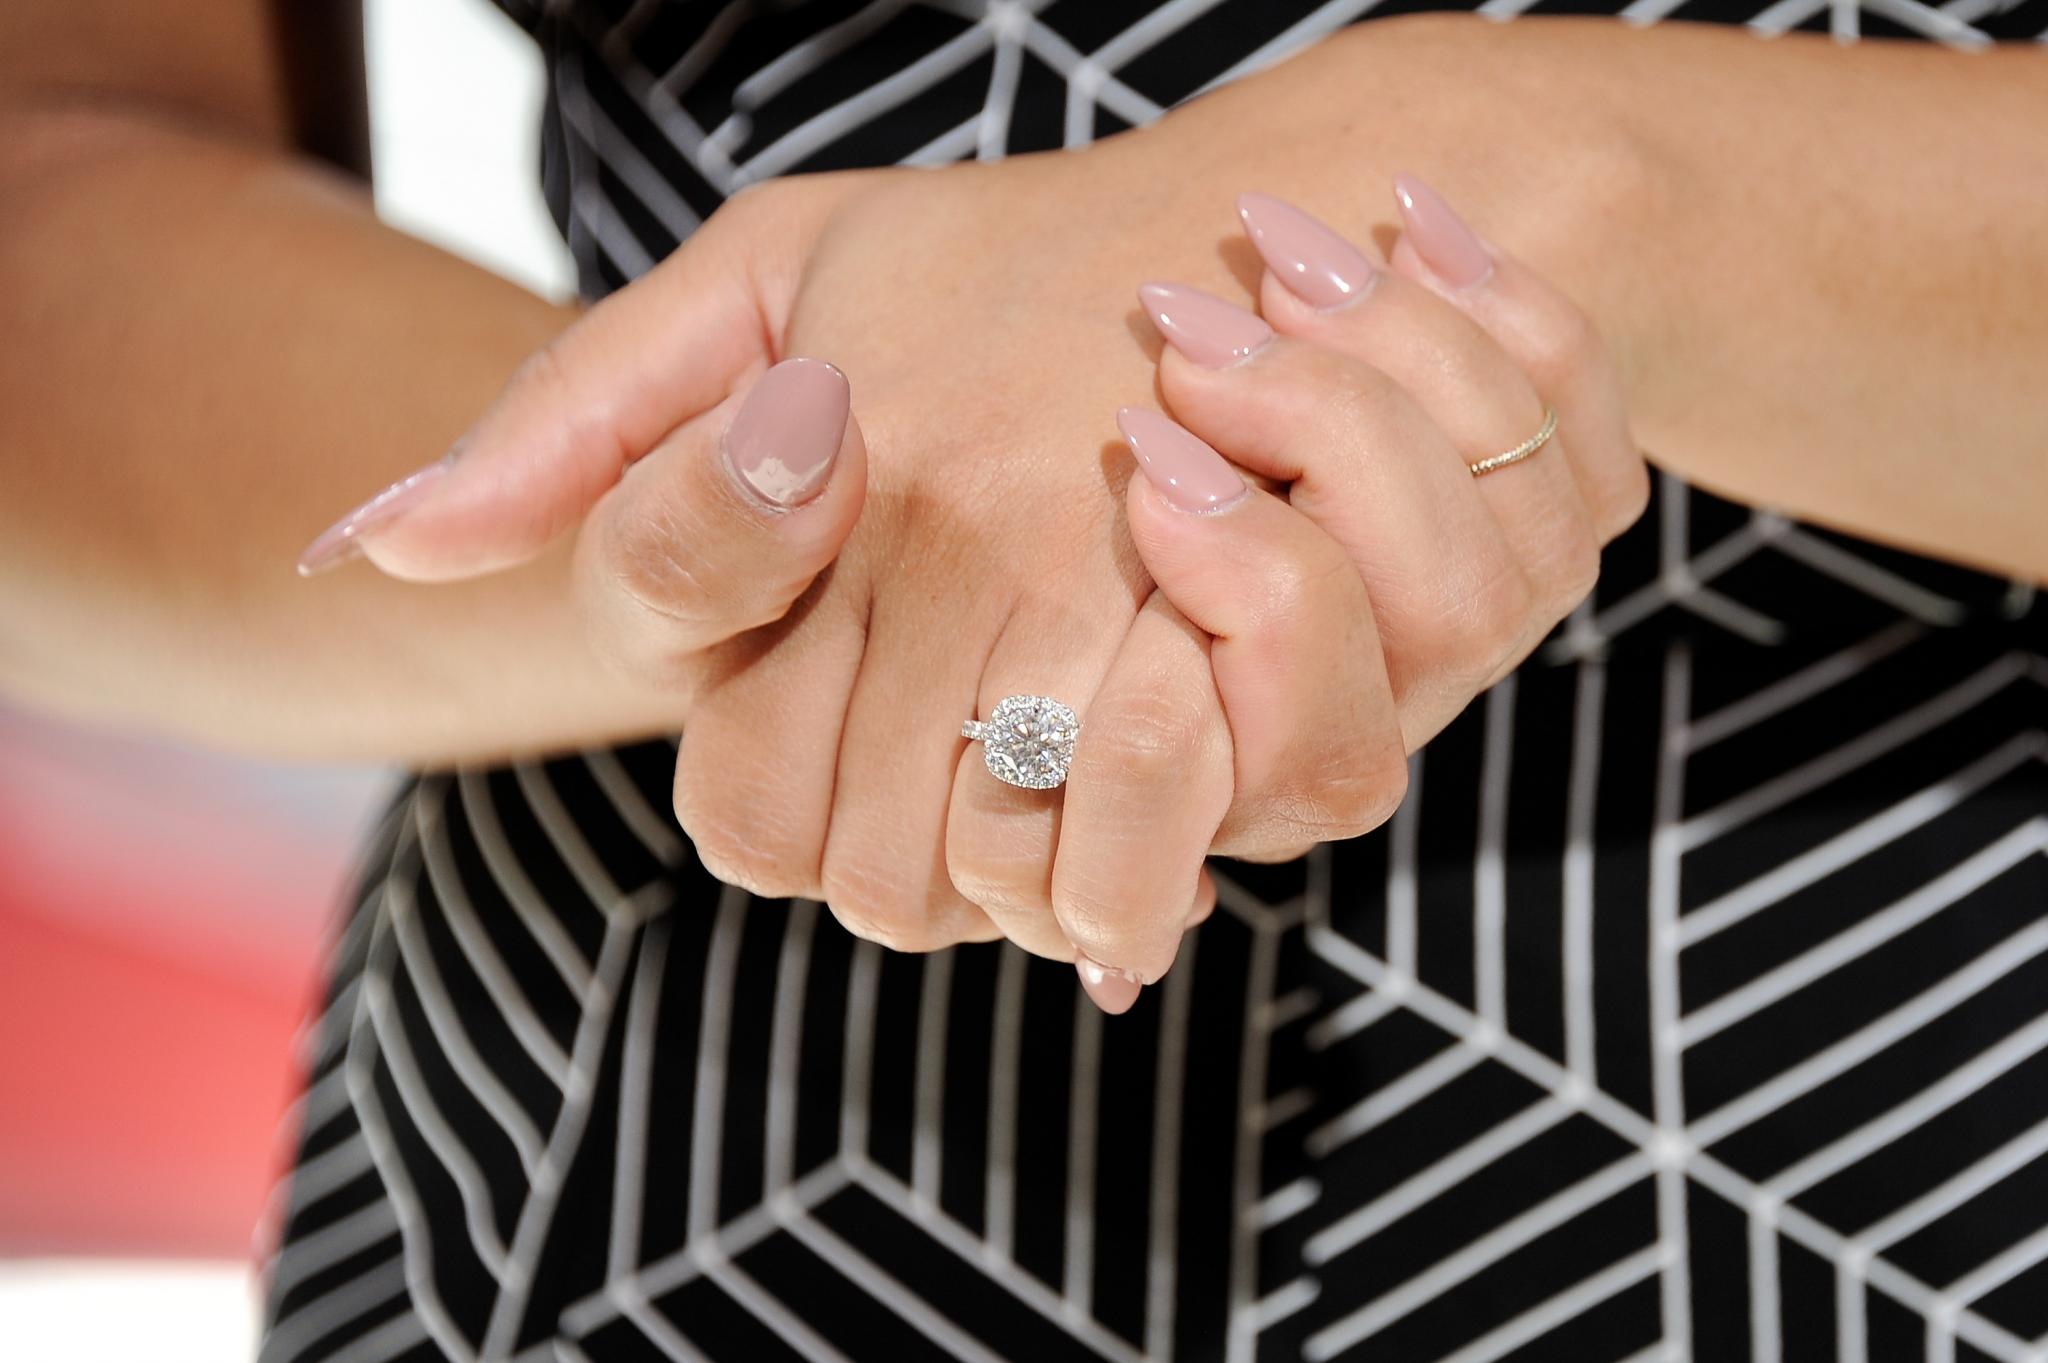 17 Celeb Engagement Rings That Have Us Swooning